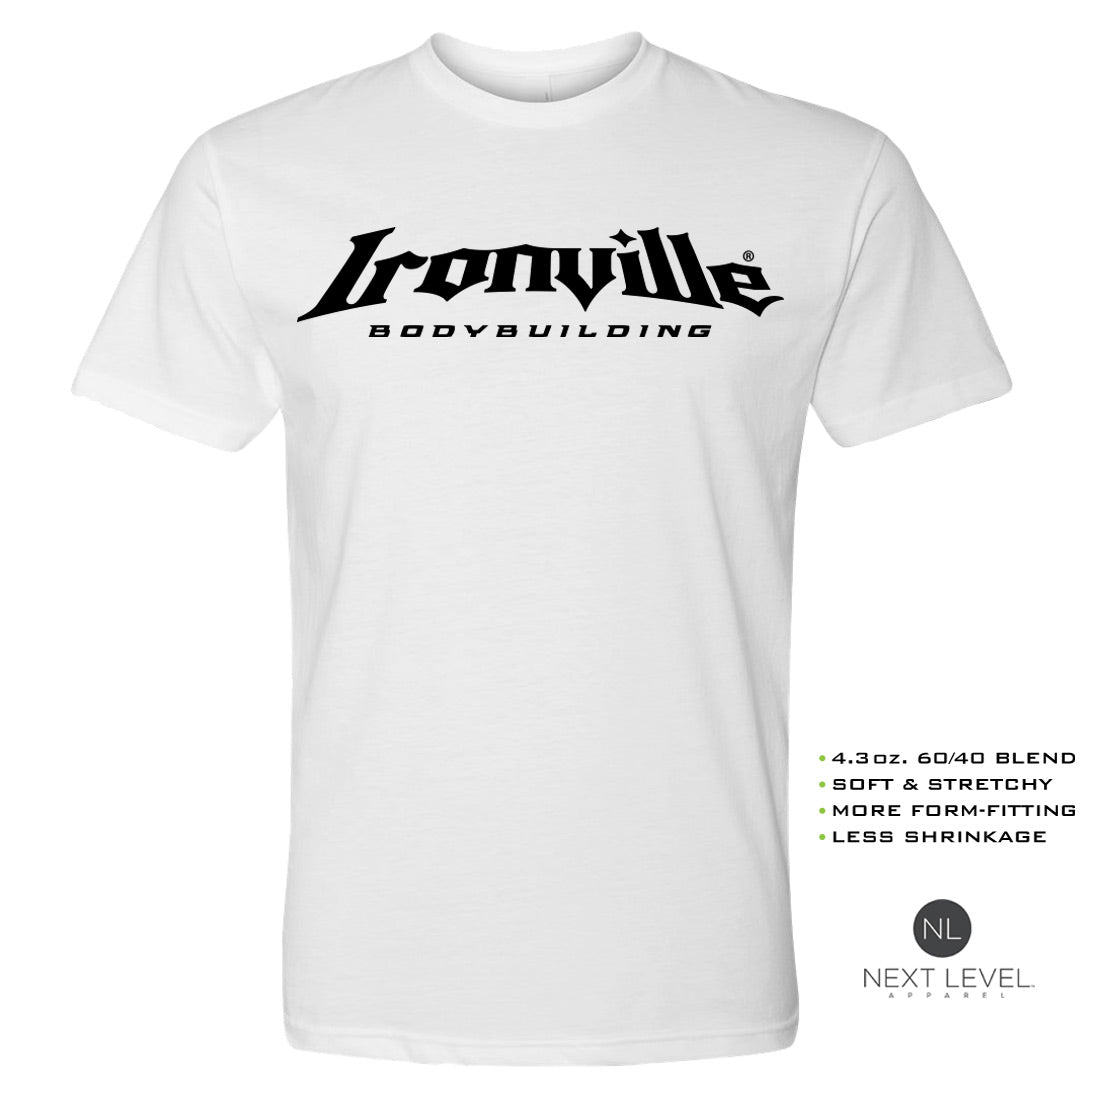 Ironville BODYBUILDING Soft-Blend Fitted Gym T-shirt